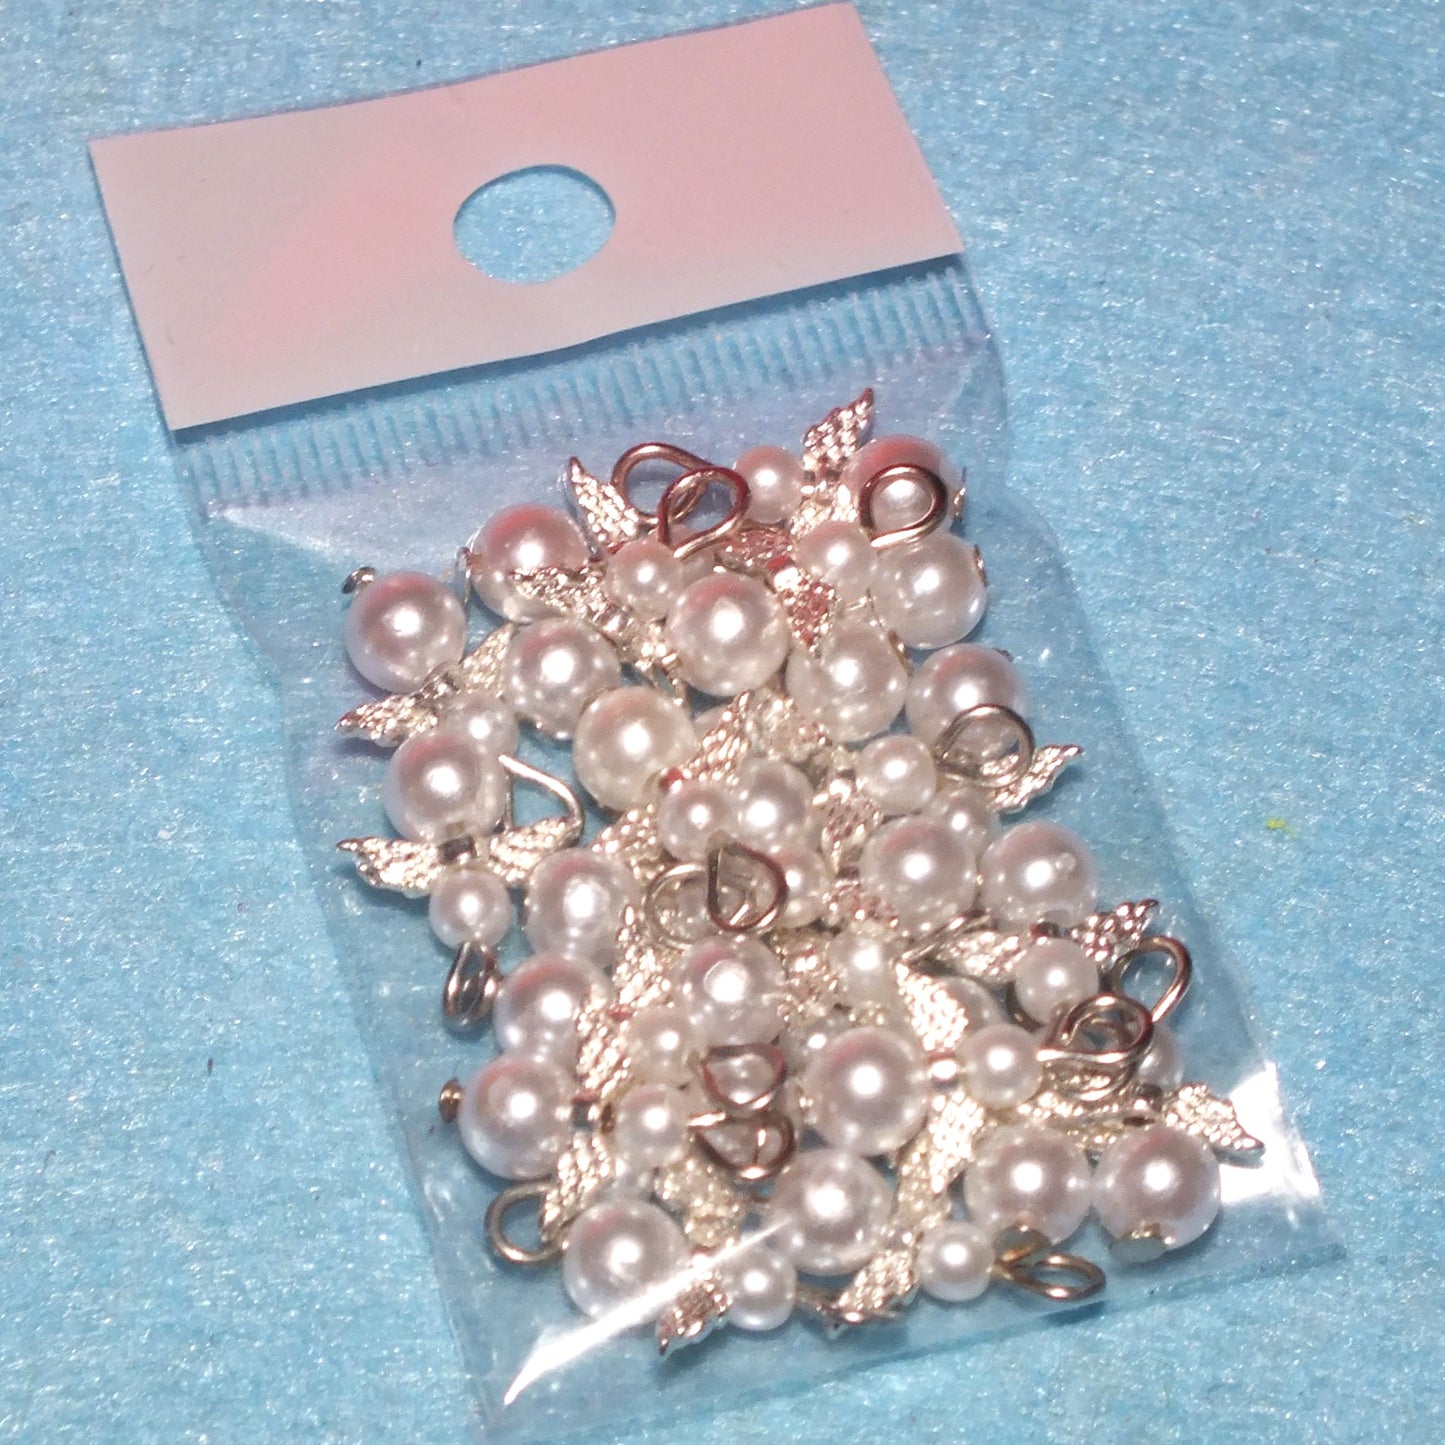 White pearl angel charms (24-250pcs, plain, on clasps or lanyards)